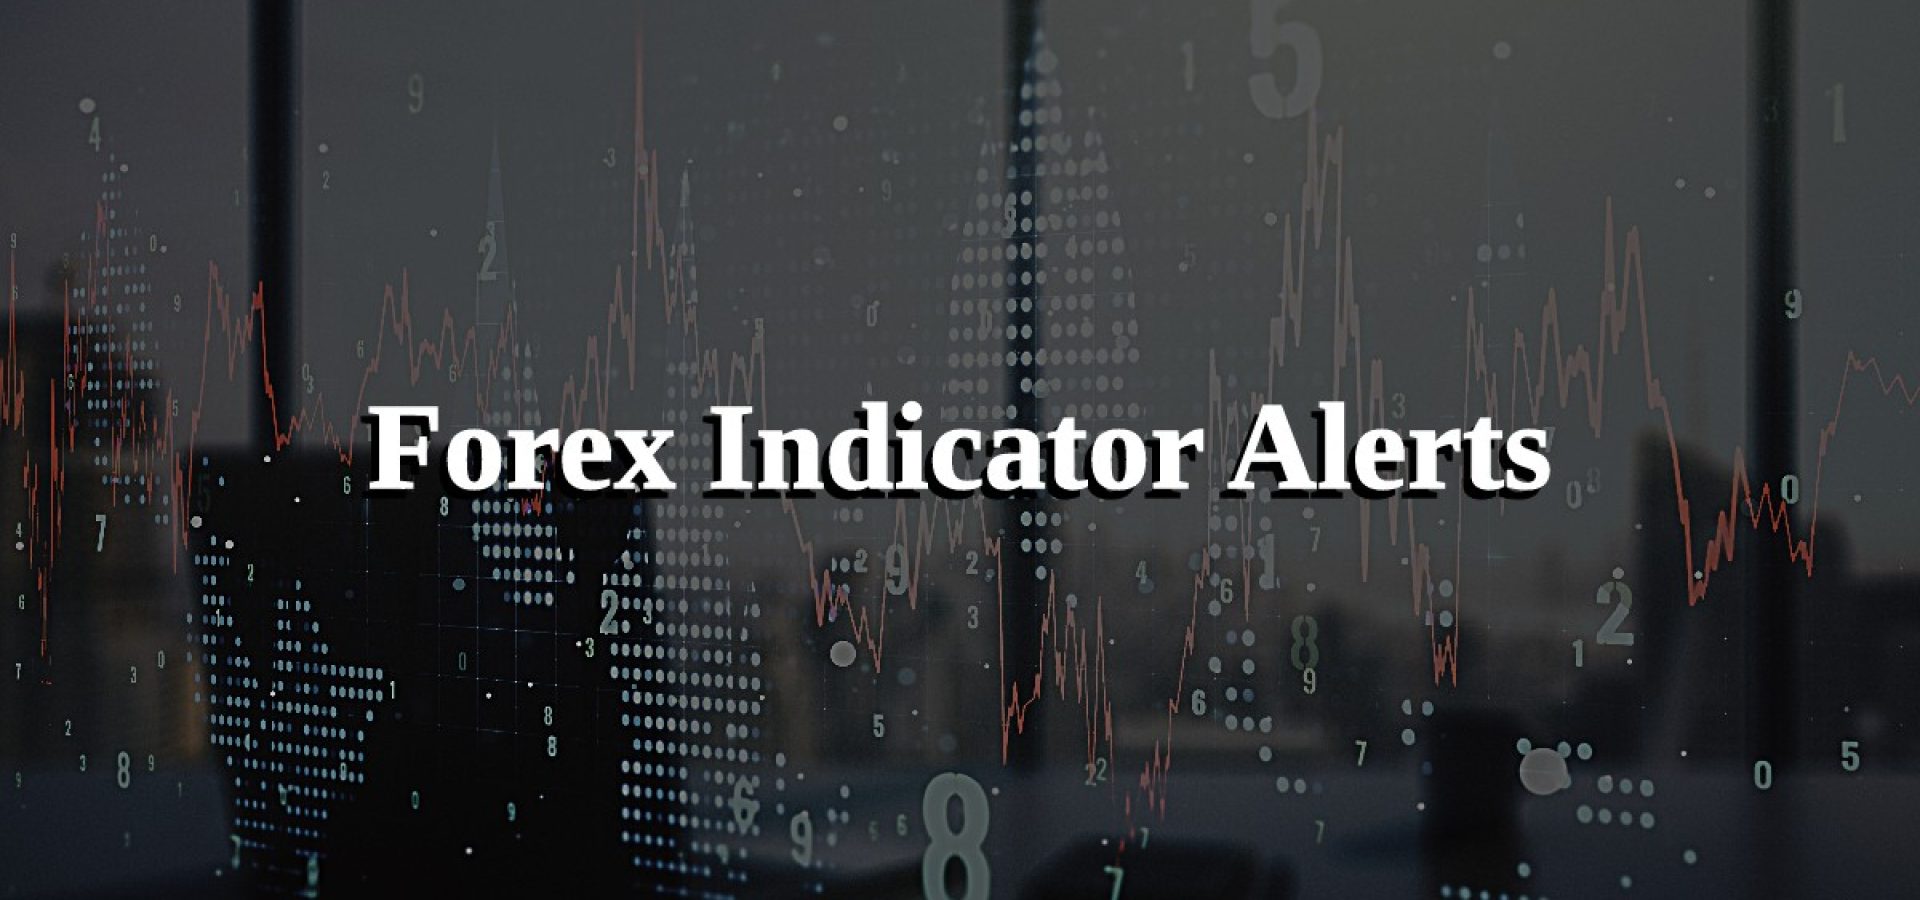 Forex indicator alerts - why are they important nowadays?